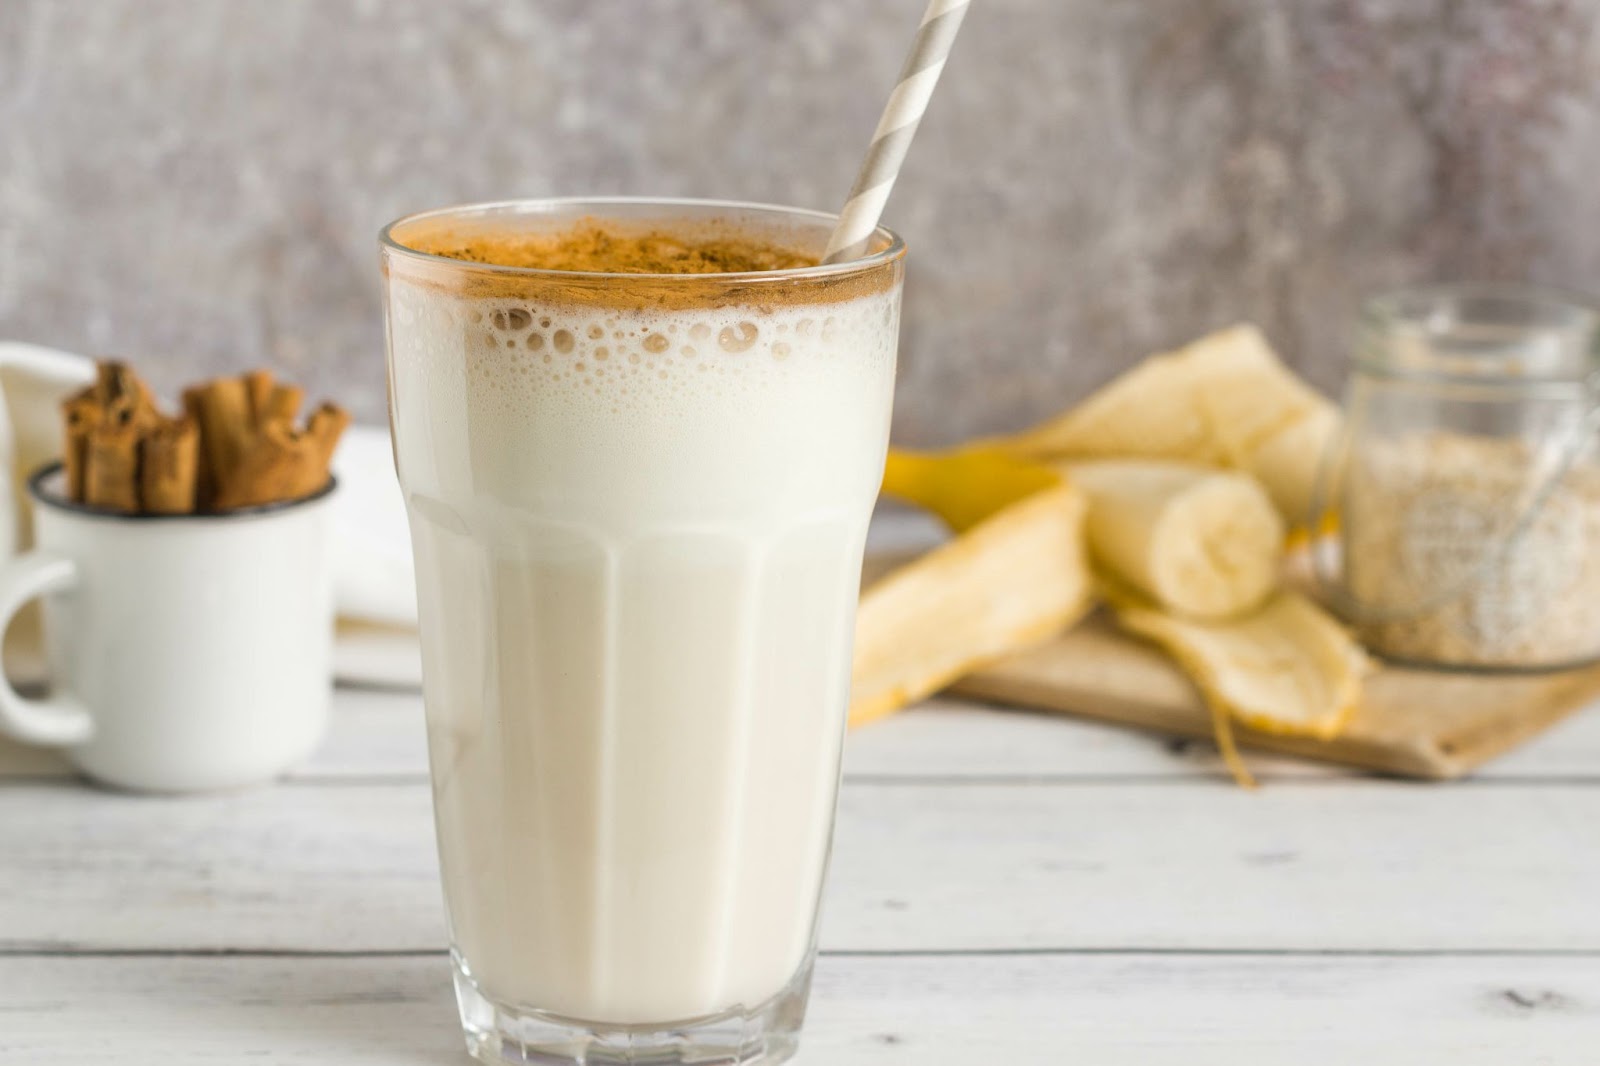 Healthy post-workout protein shake with cinnamon and banana